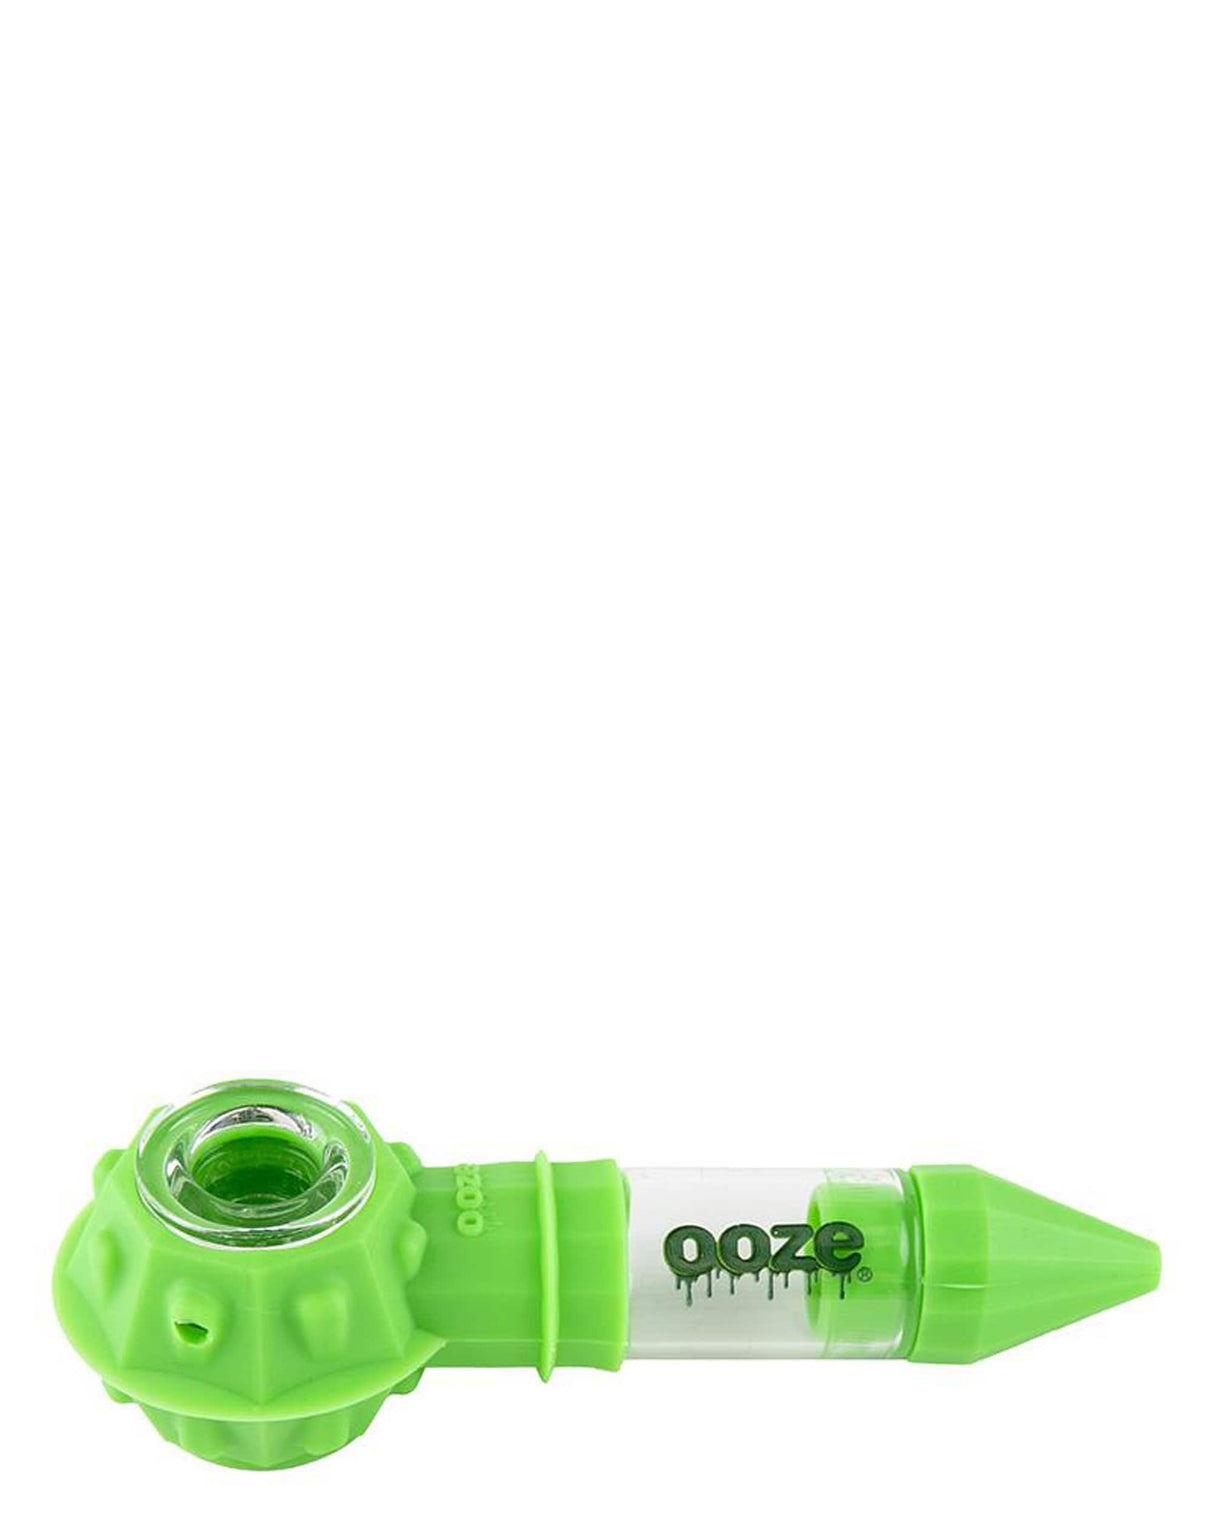 Ooze Bowser Silicone Pipe in Green, Durable Spoon Design, 4" Length, for Dry Herbs